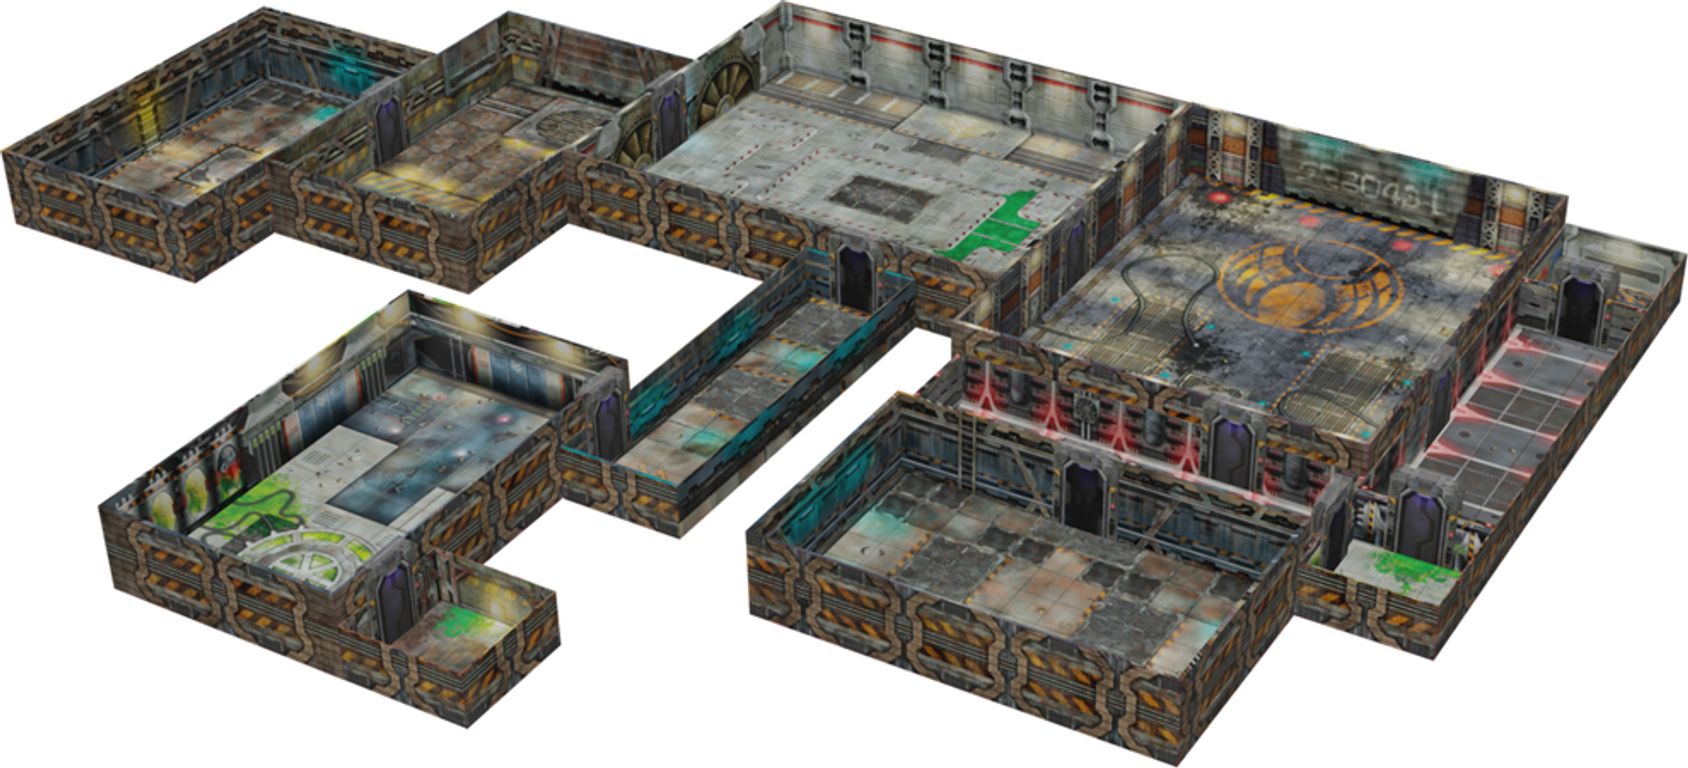 Tenfold Dungeon: Daedalus Station componenti